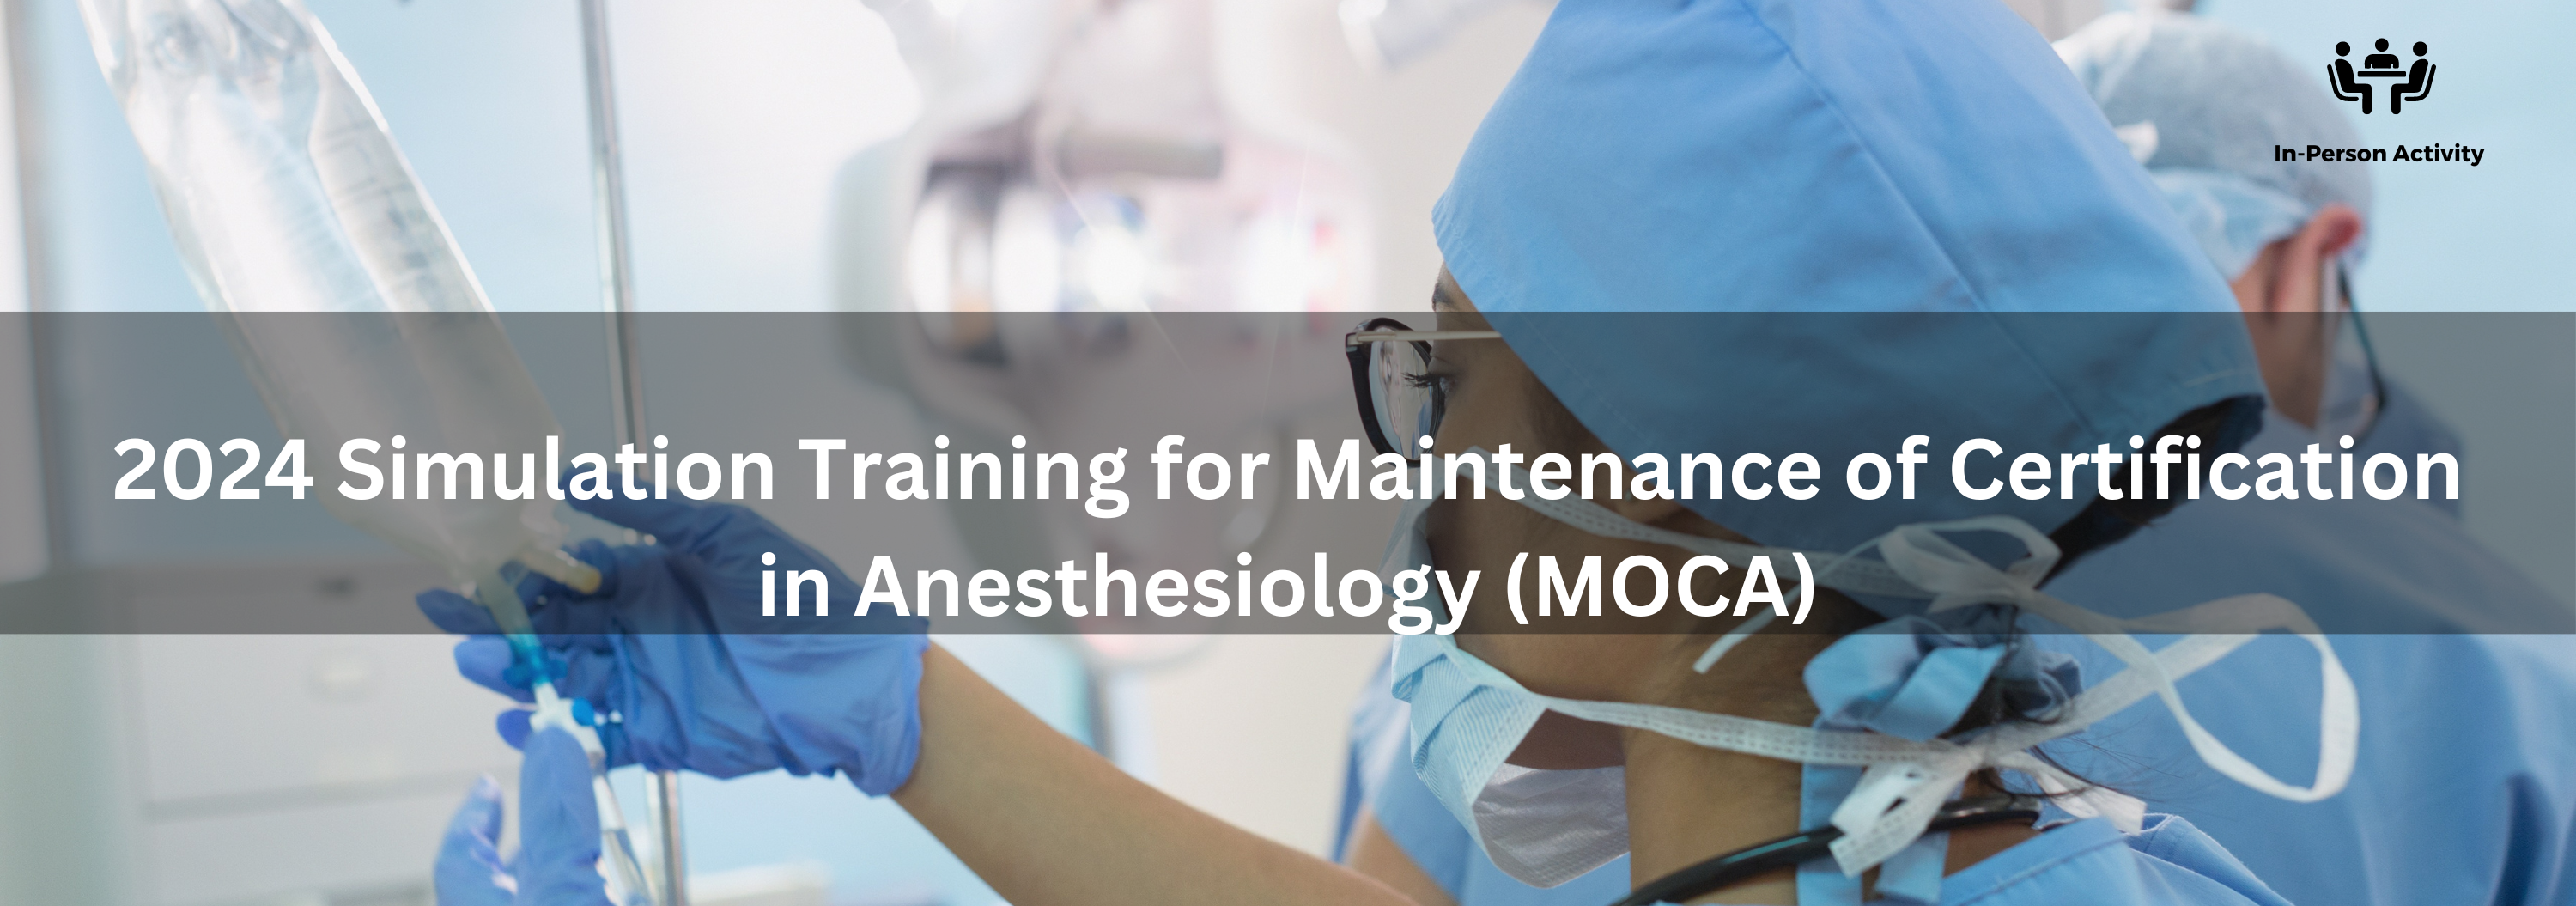 2024 Simulation Training for Maintenance of Certification in Anesthesiology (MOCA) - October Banner